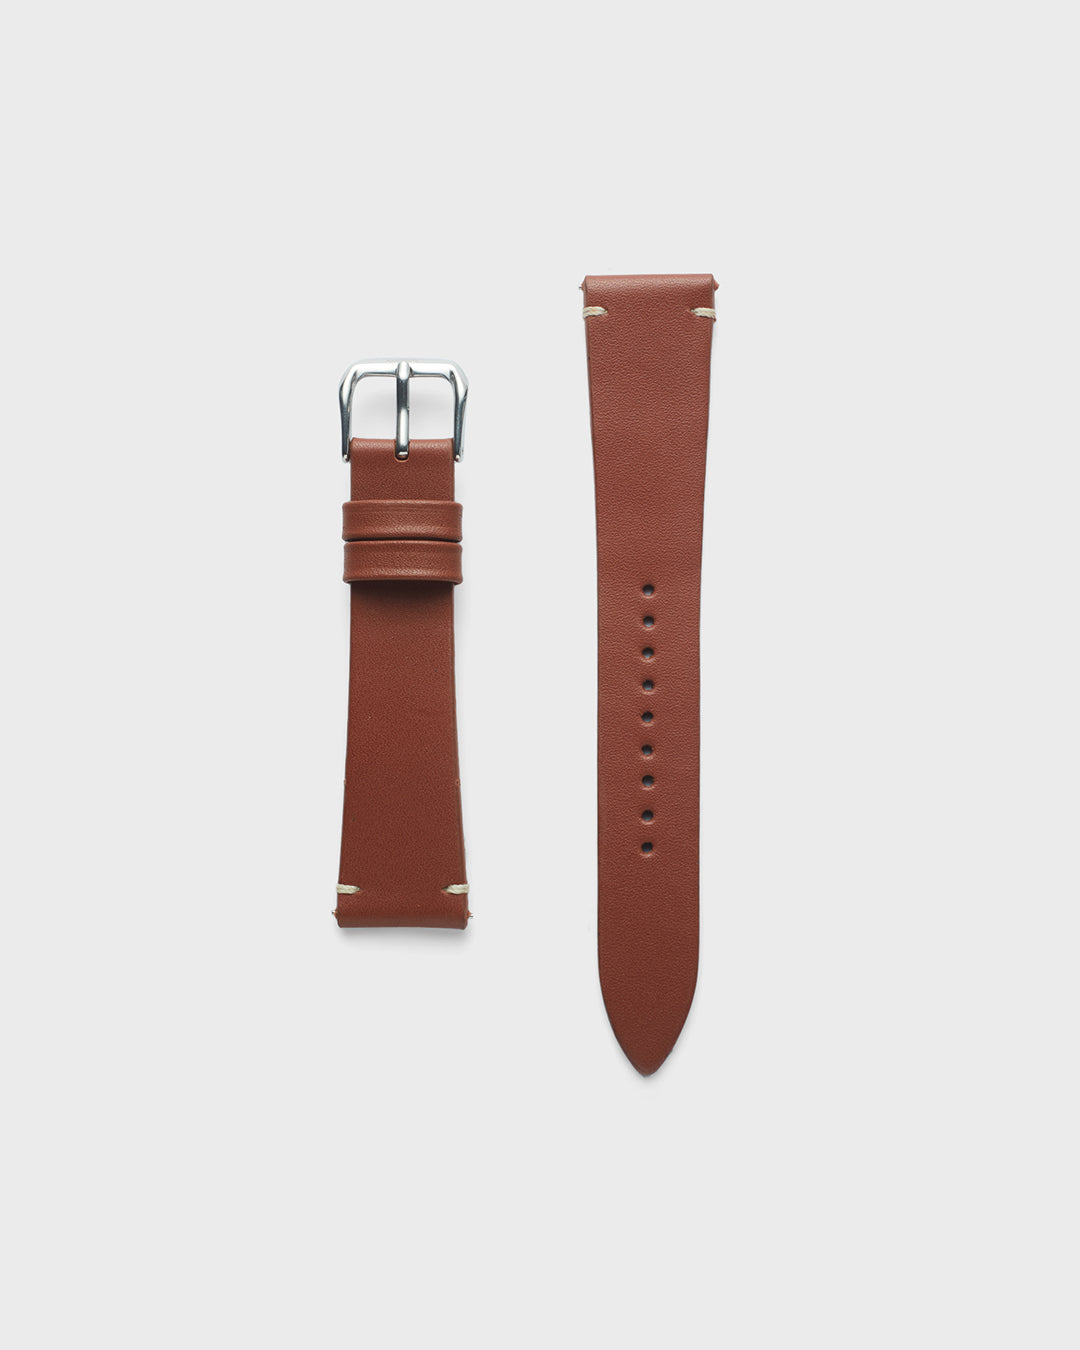 INTRO STRAP - FOR QUARTZ, MECHANICAL & SMART WATCHES [Duo Stitch in Fine Indian Leather] My Store